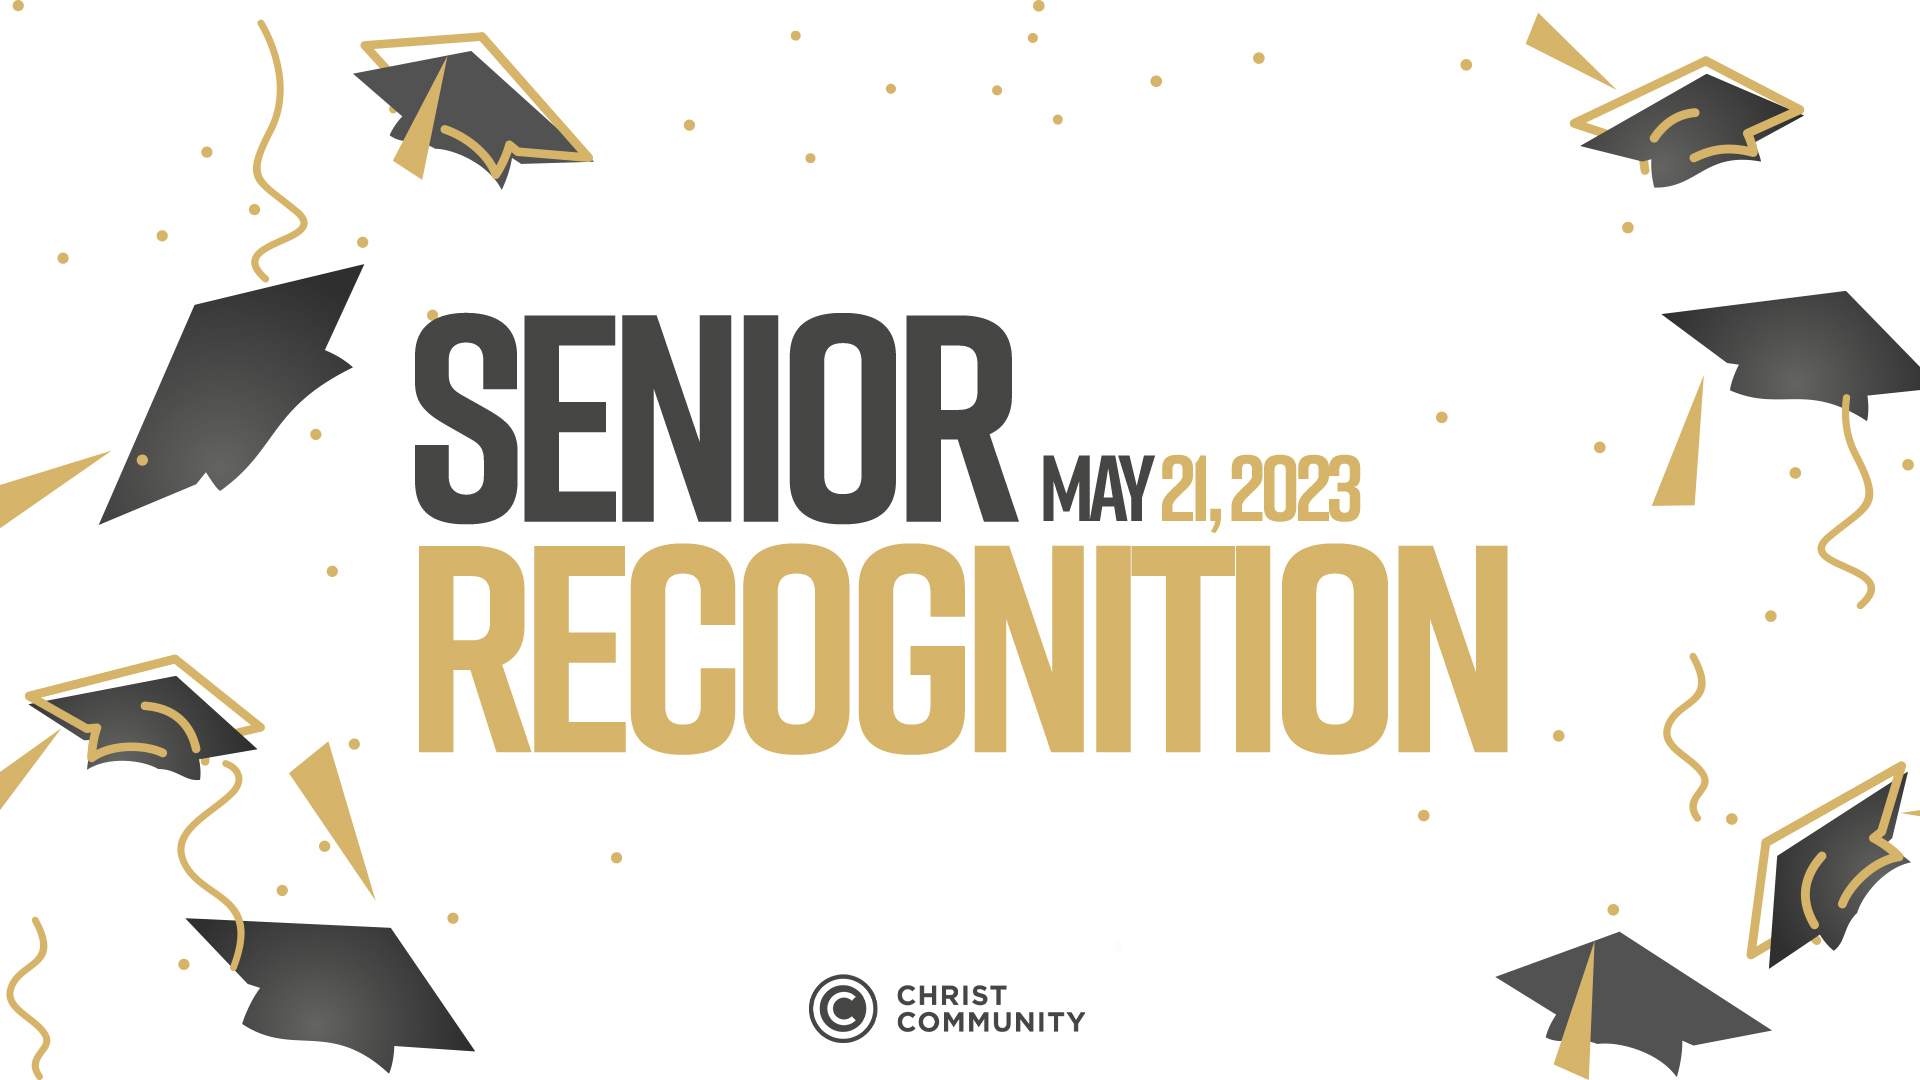 Senior Recognition at Christ Community, May 21